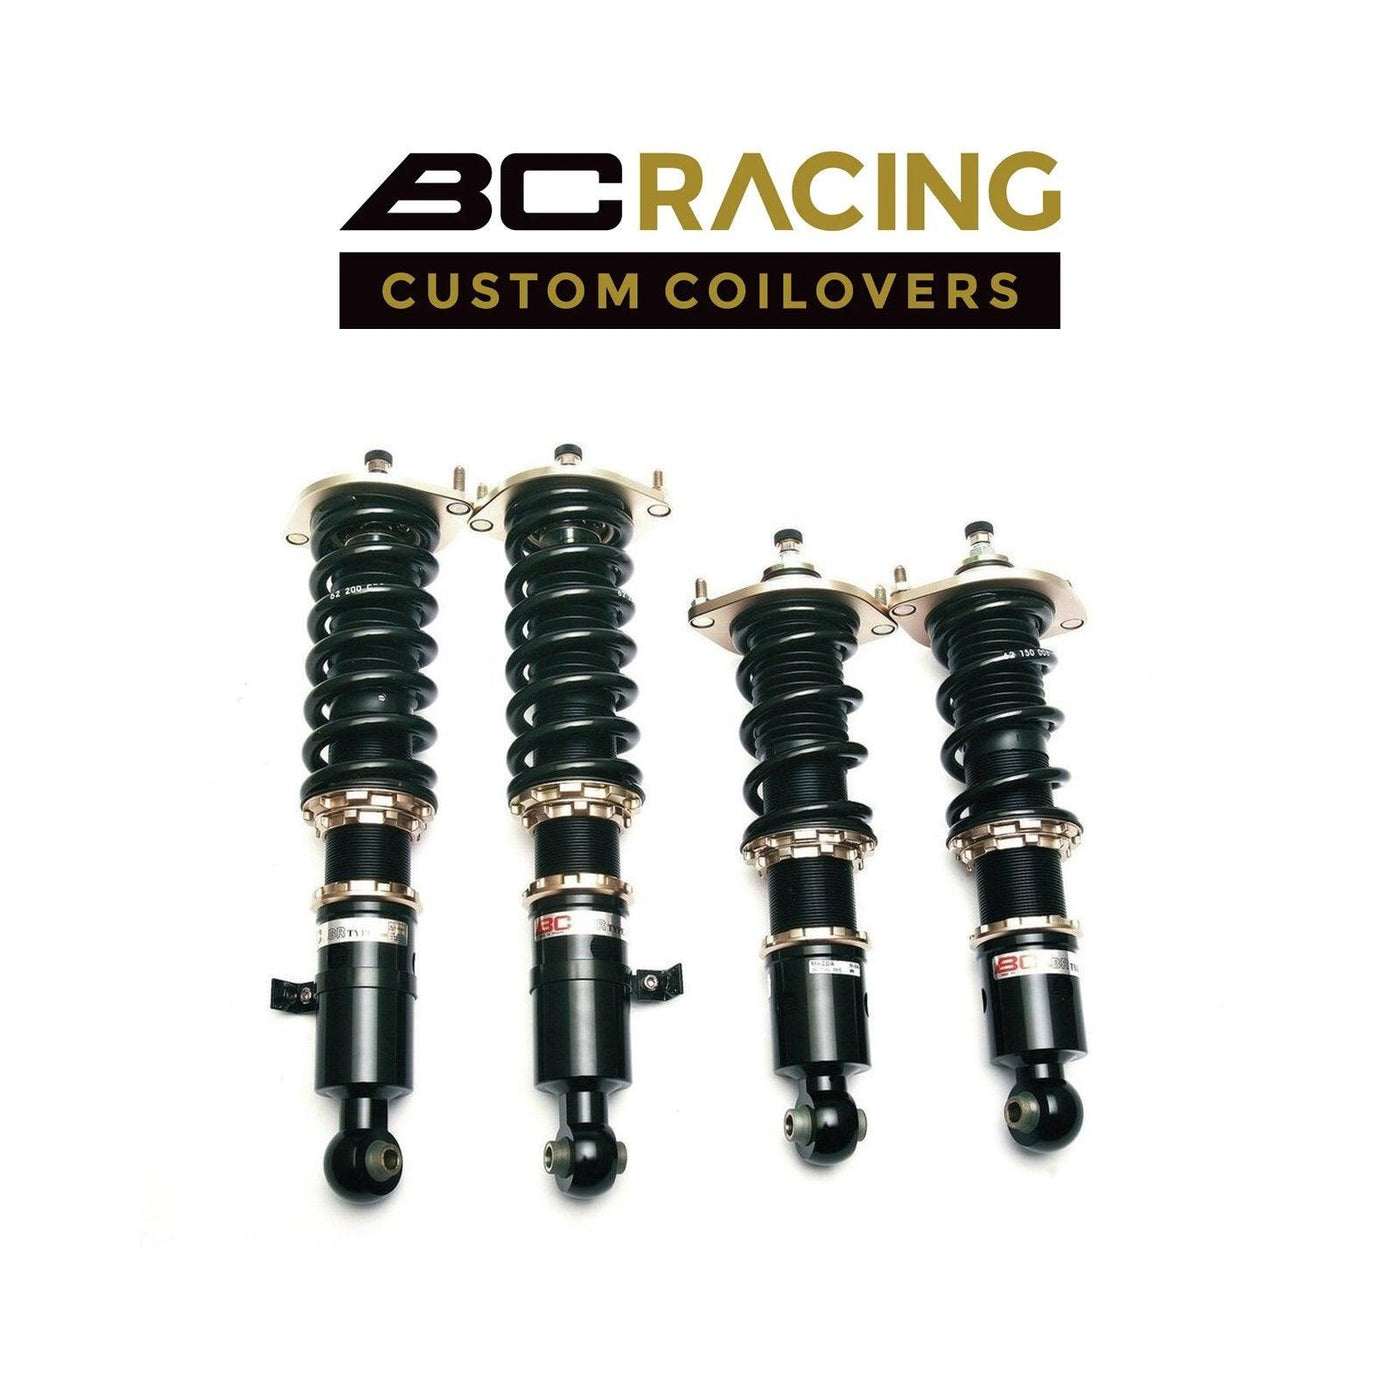 BC Racing Coilovers 2002-2008 AUDI A4 FWD/AWD - Attacking the Clock Racing